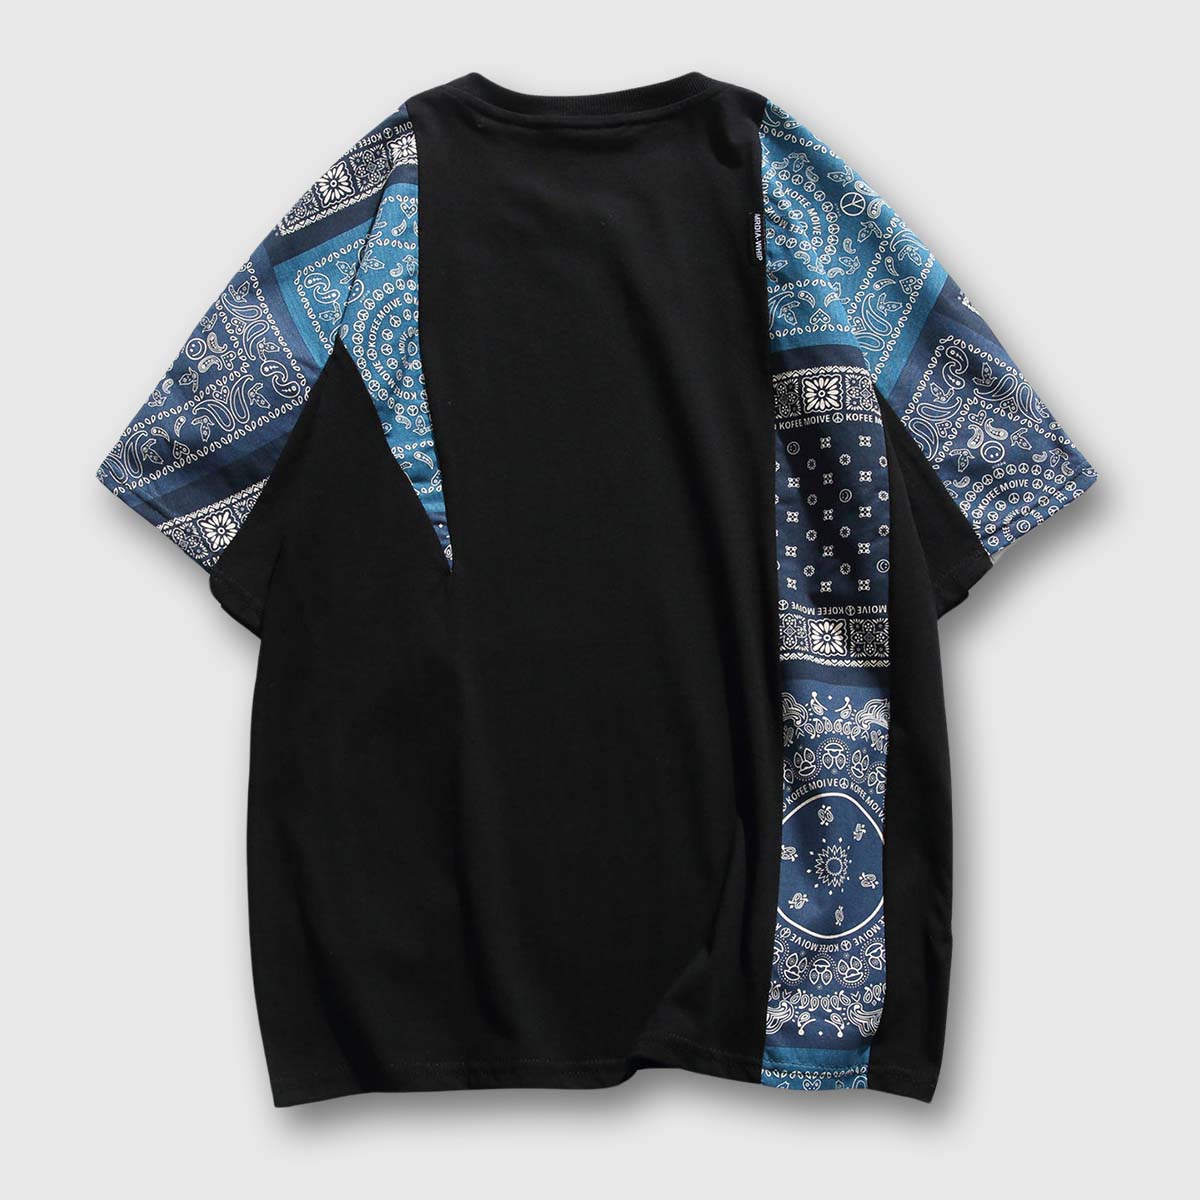 Back view of men's retro patchwork kimono style shirt with detailed patchwork in black